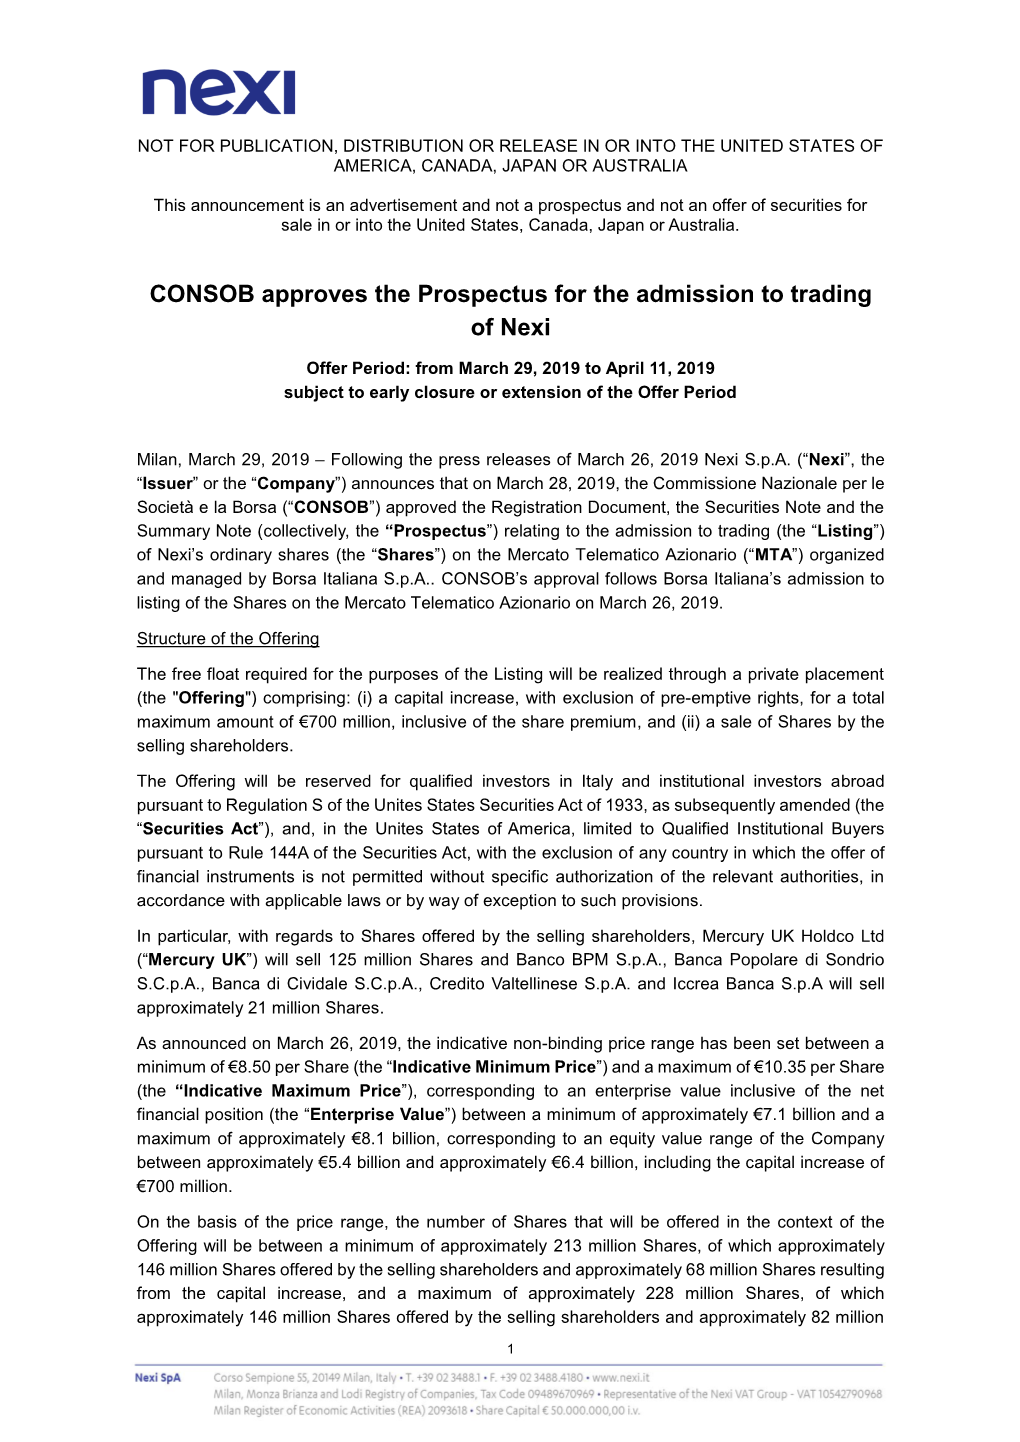 March 29Th 2019 CONSOB Approves the Prospectus for the Admission to Trading of Nexi